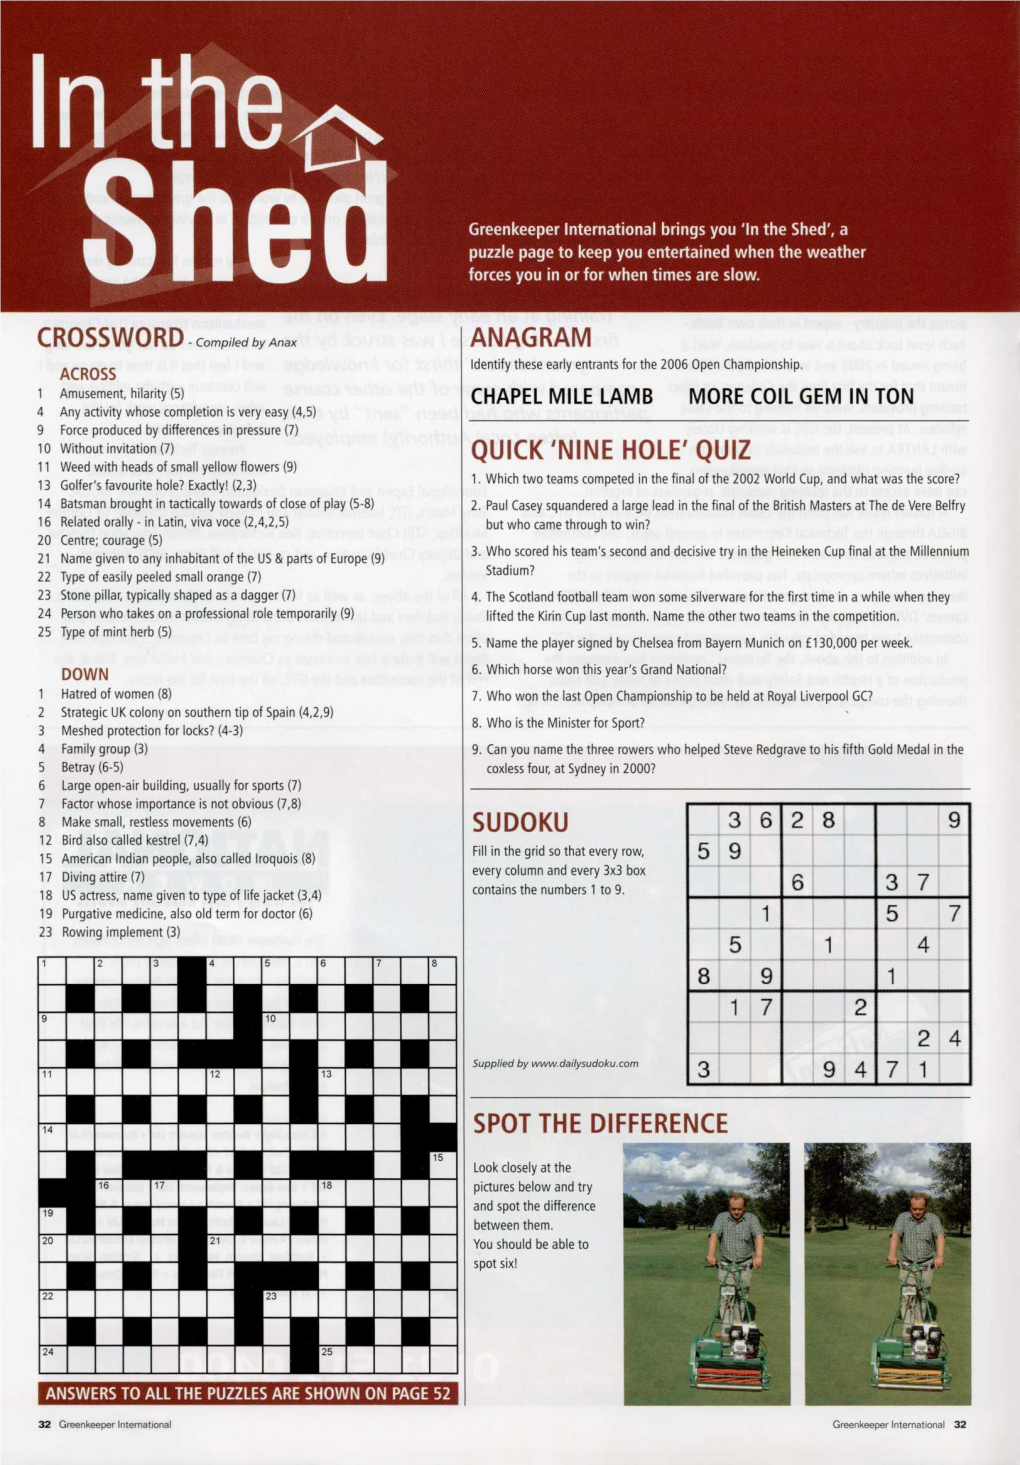 Sudoku Spot the Difference